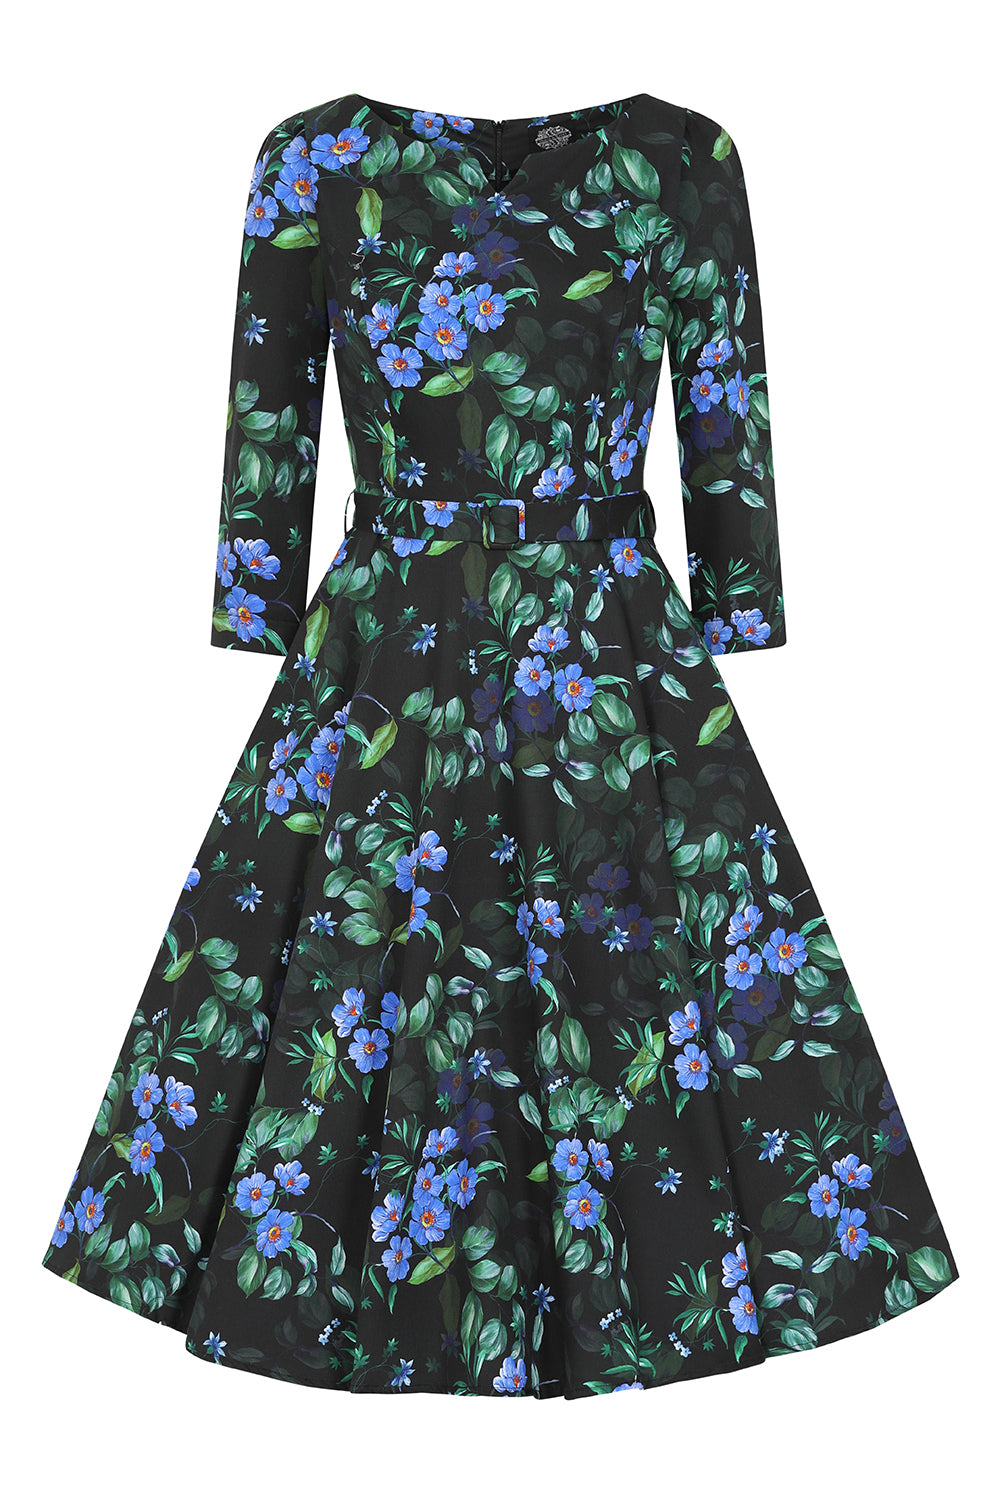 Amira Floral Swing Dress by Hearts & Roses